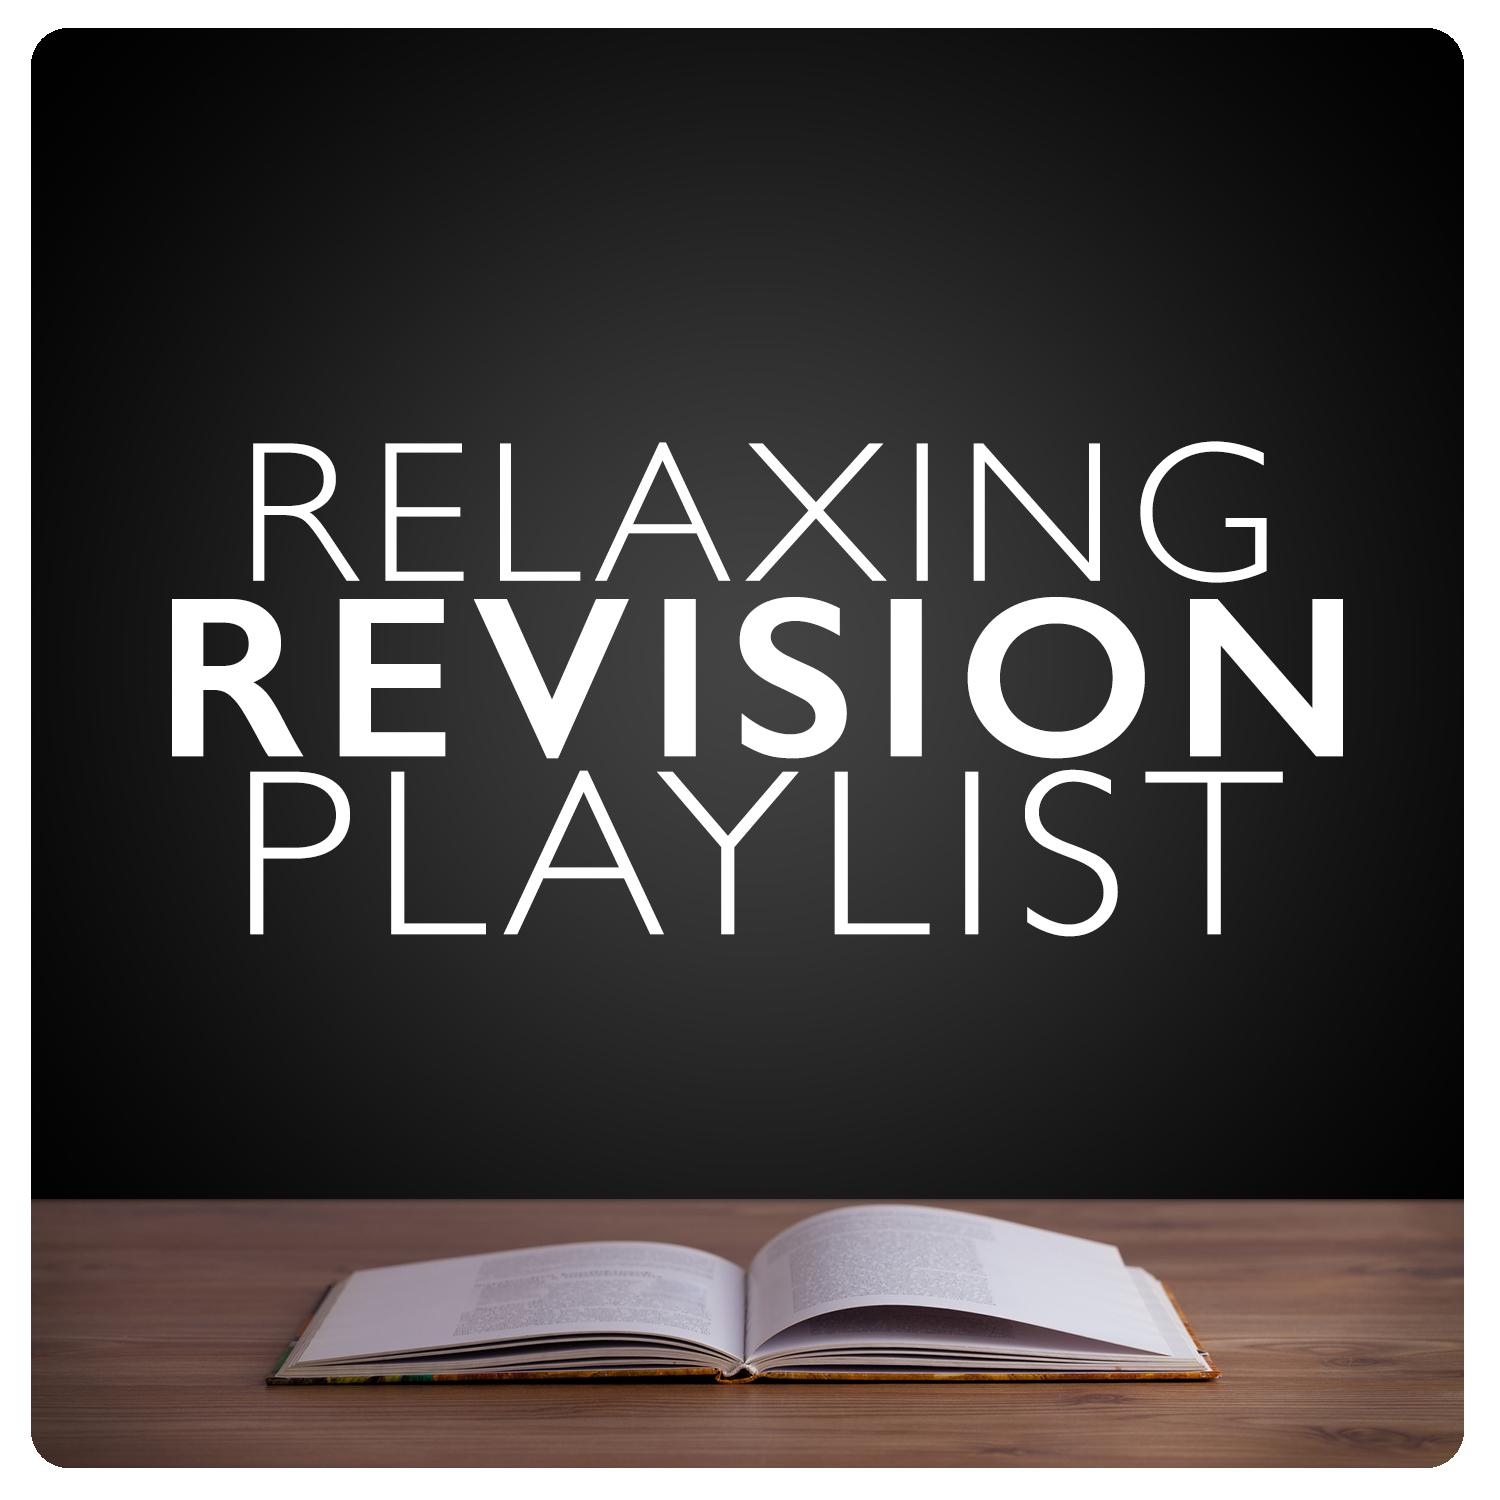 Relaxing Revision Playlist